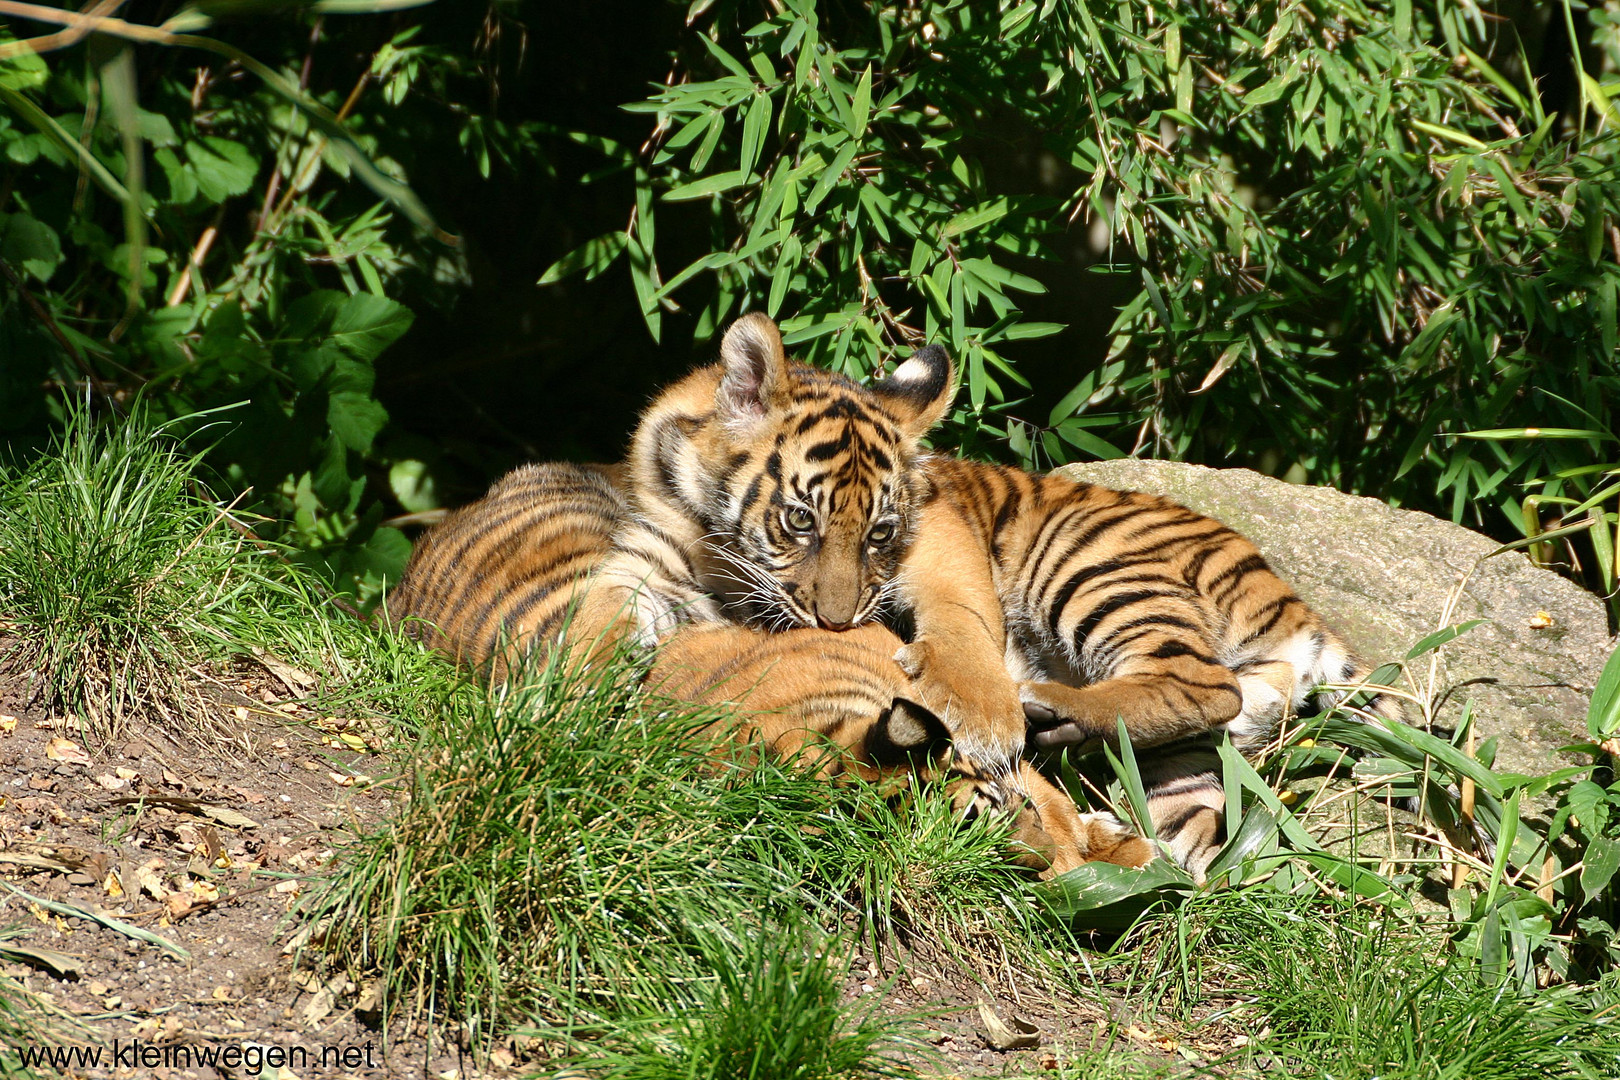 Young tiger playing